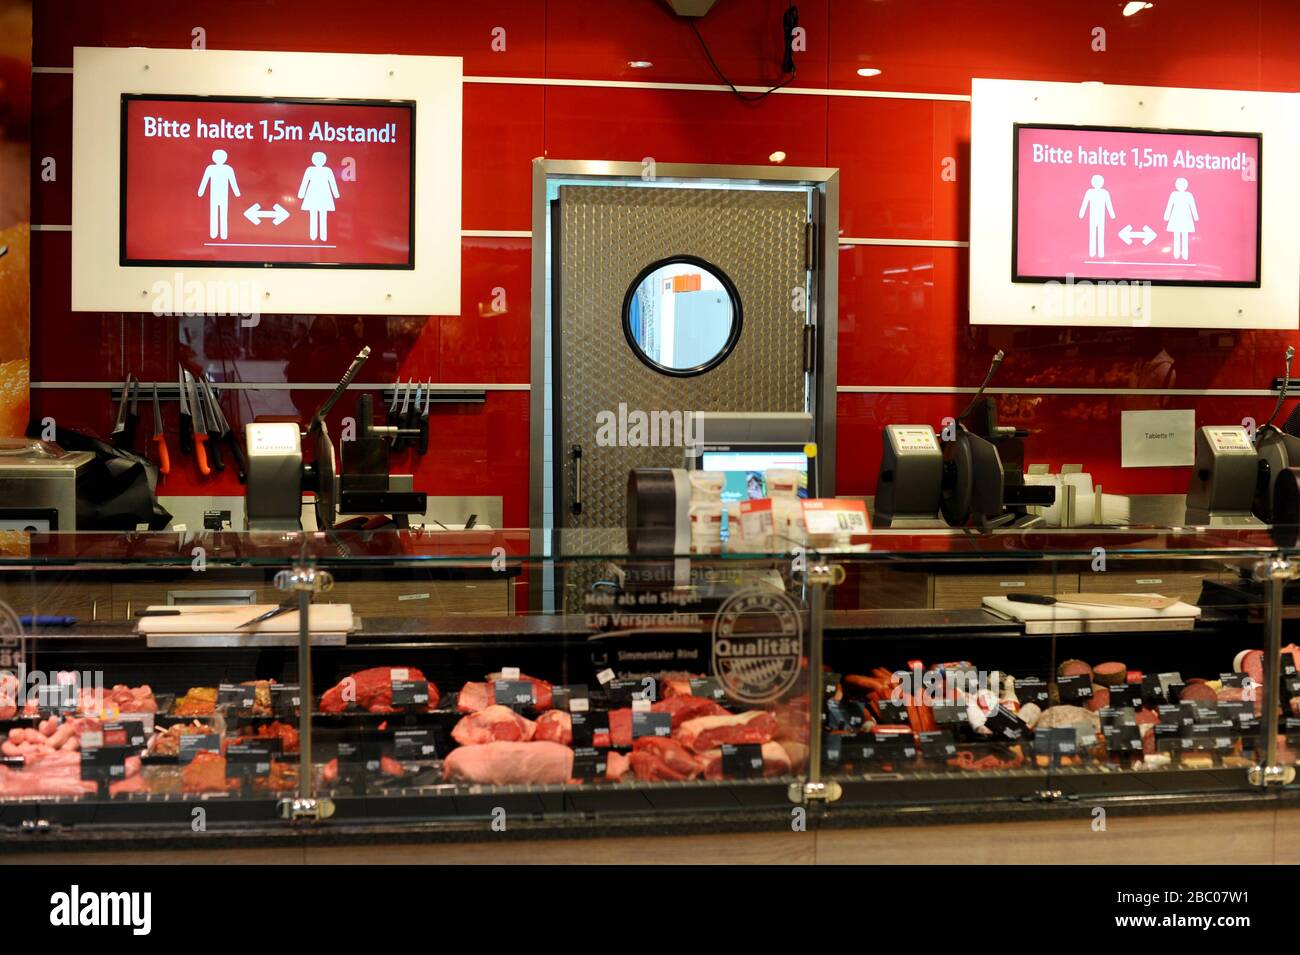 Food shopping in times of the Corona pandemic: in the picture, signs in the meat and sausage department of a branch of the Rewe supermarket chain in Obergiesing call on customers to keep their distance. [automated translation] Stock Photo